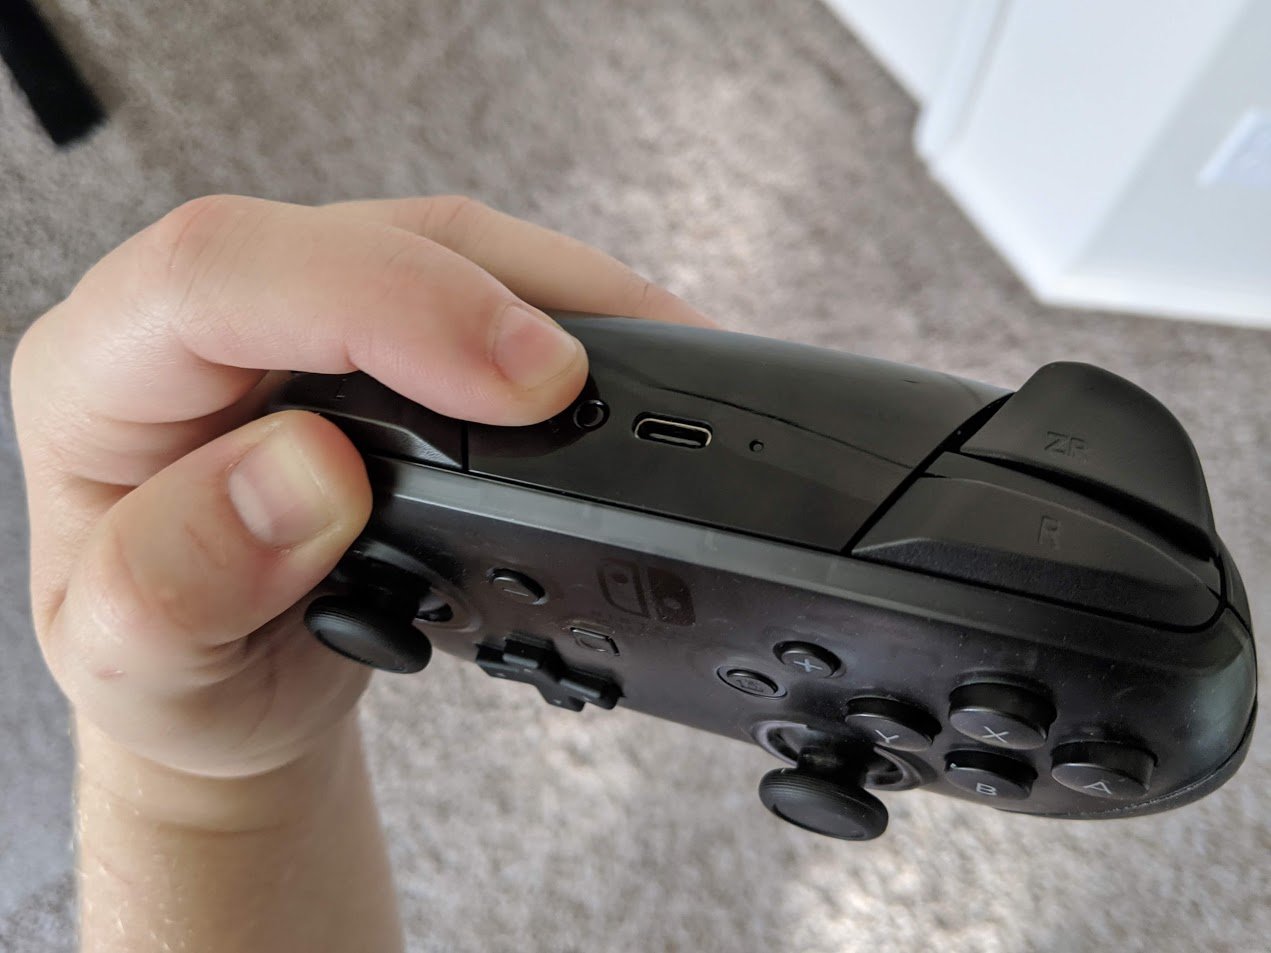 Pressing the sync button on Pro Controller